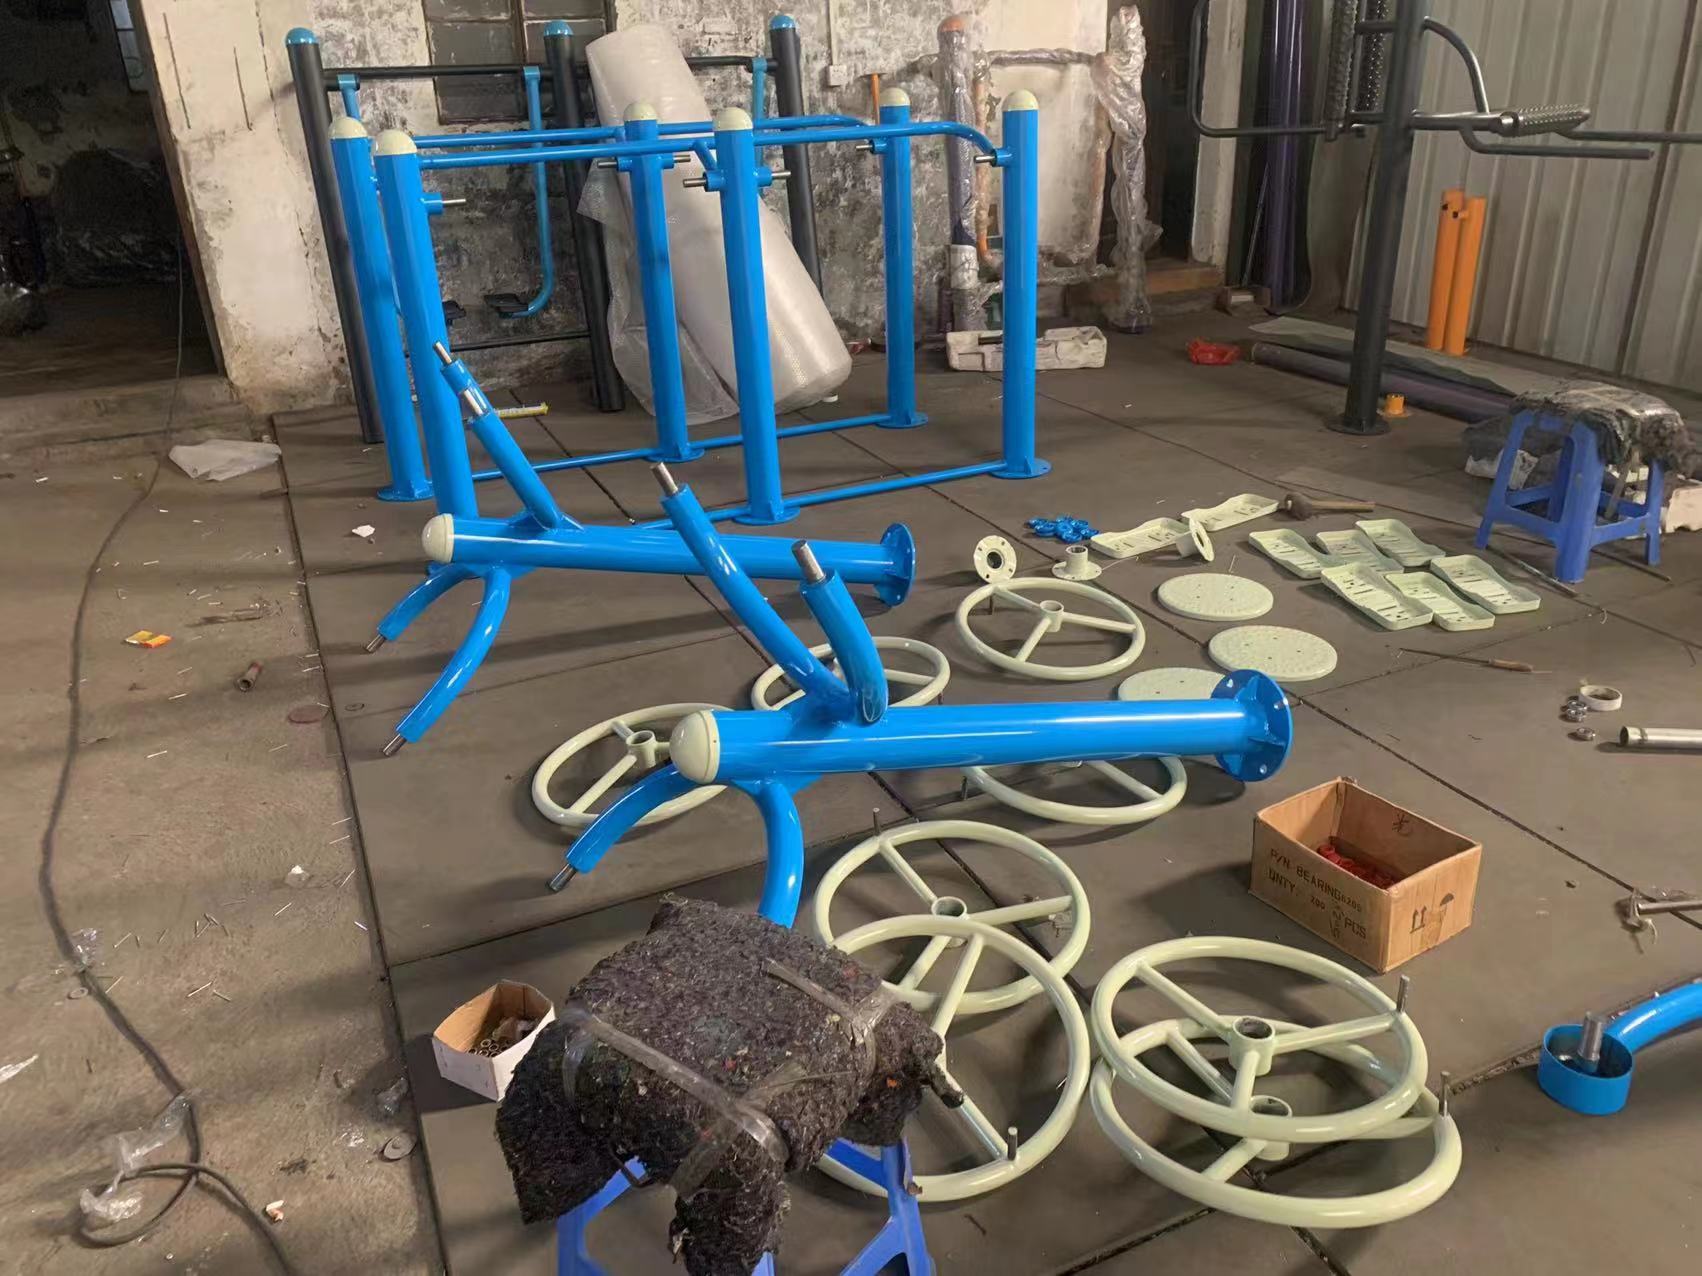 New Rural Elderly Fitness Equipment Community Park Renovation Three person Walking Machine Factory Delivery and Installation